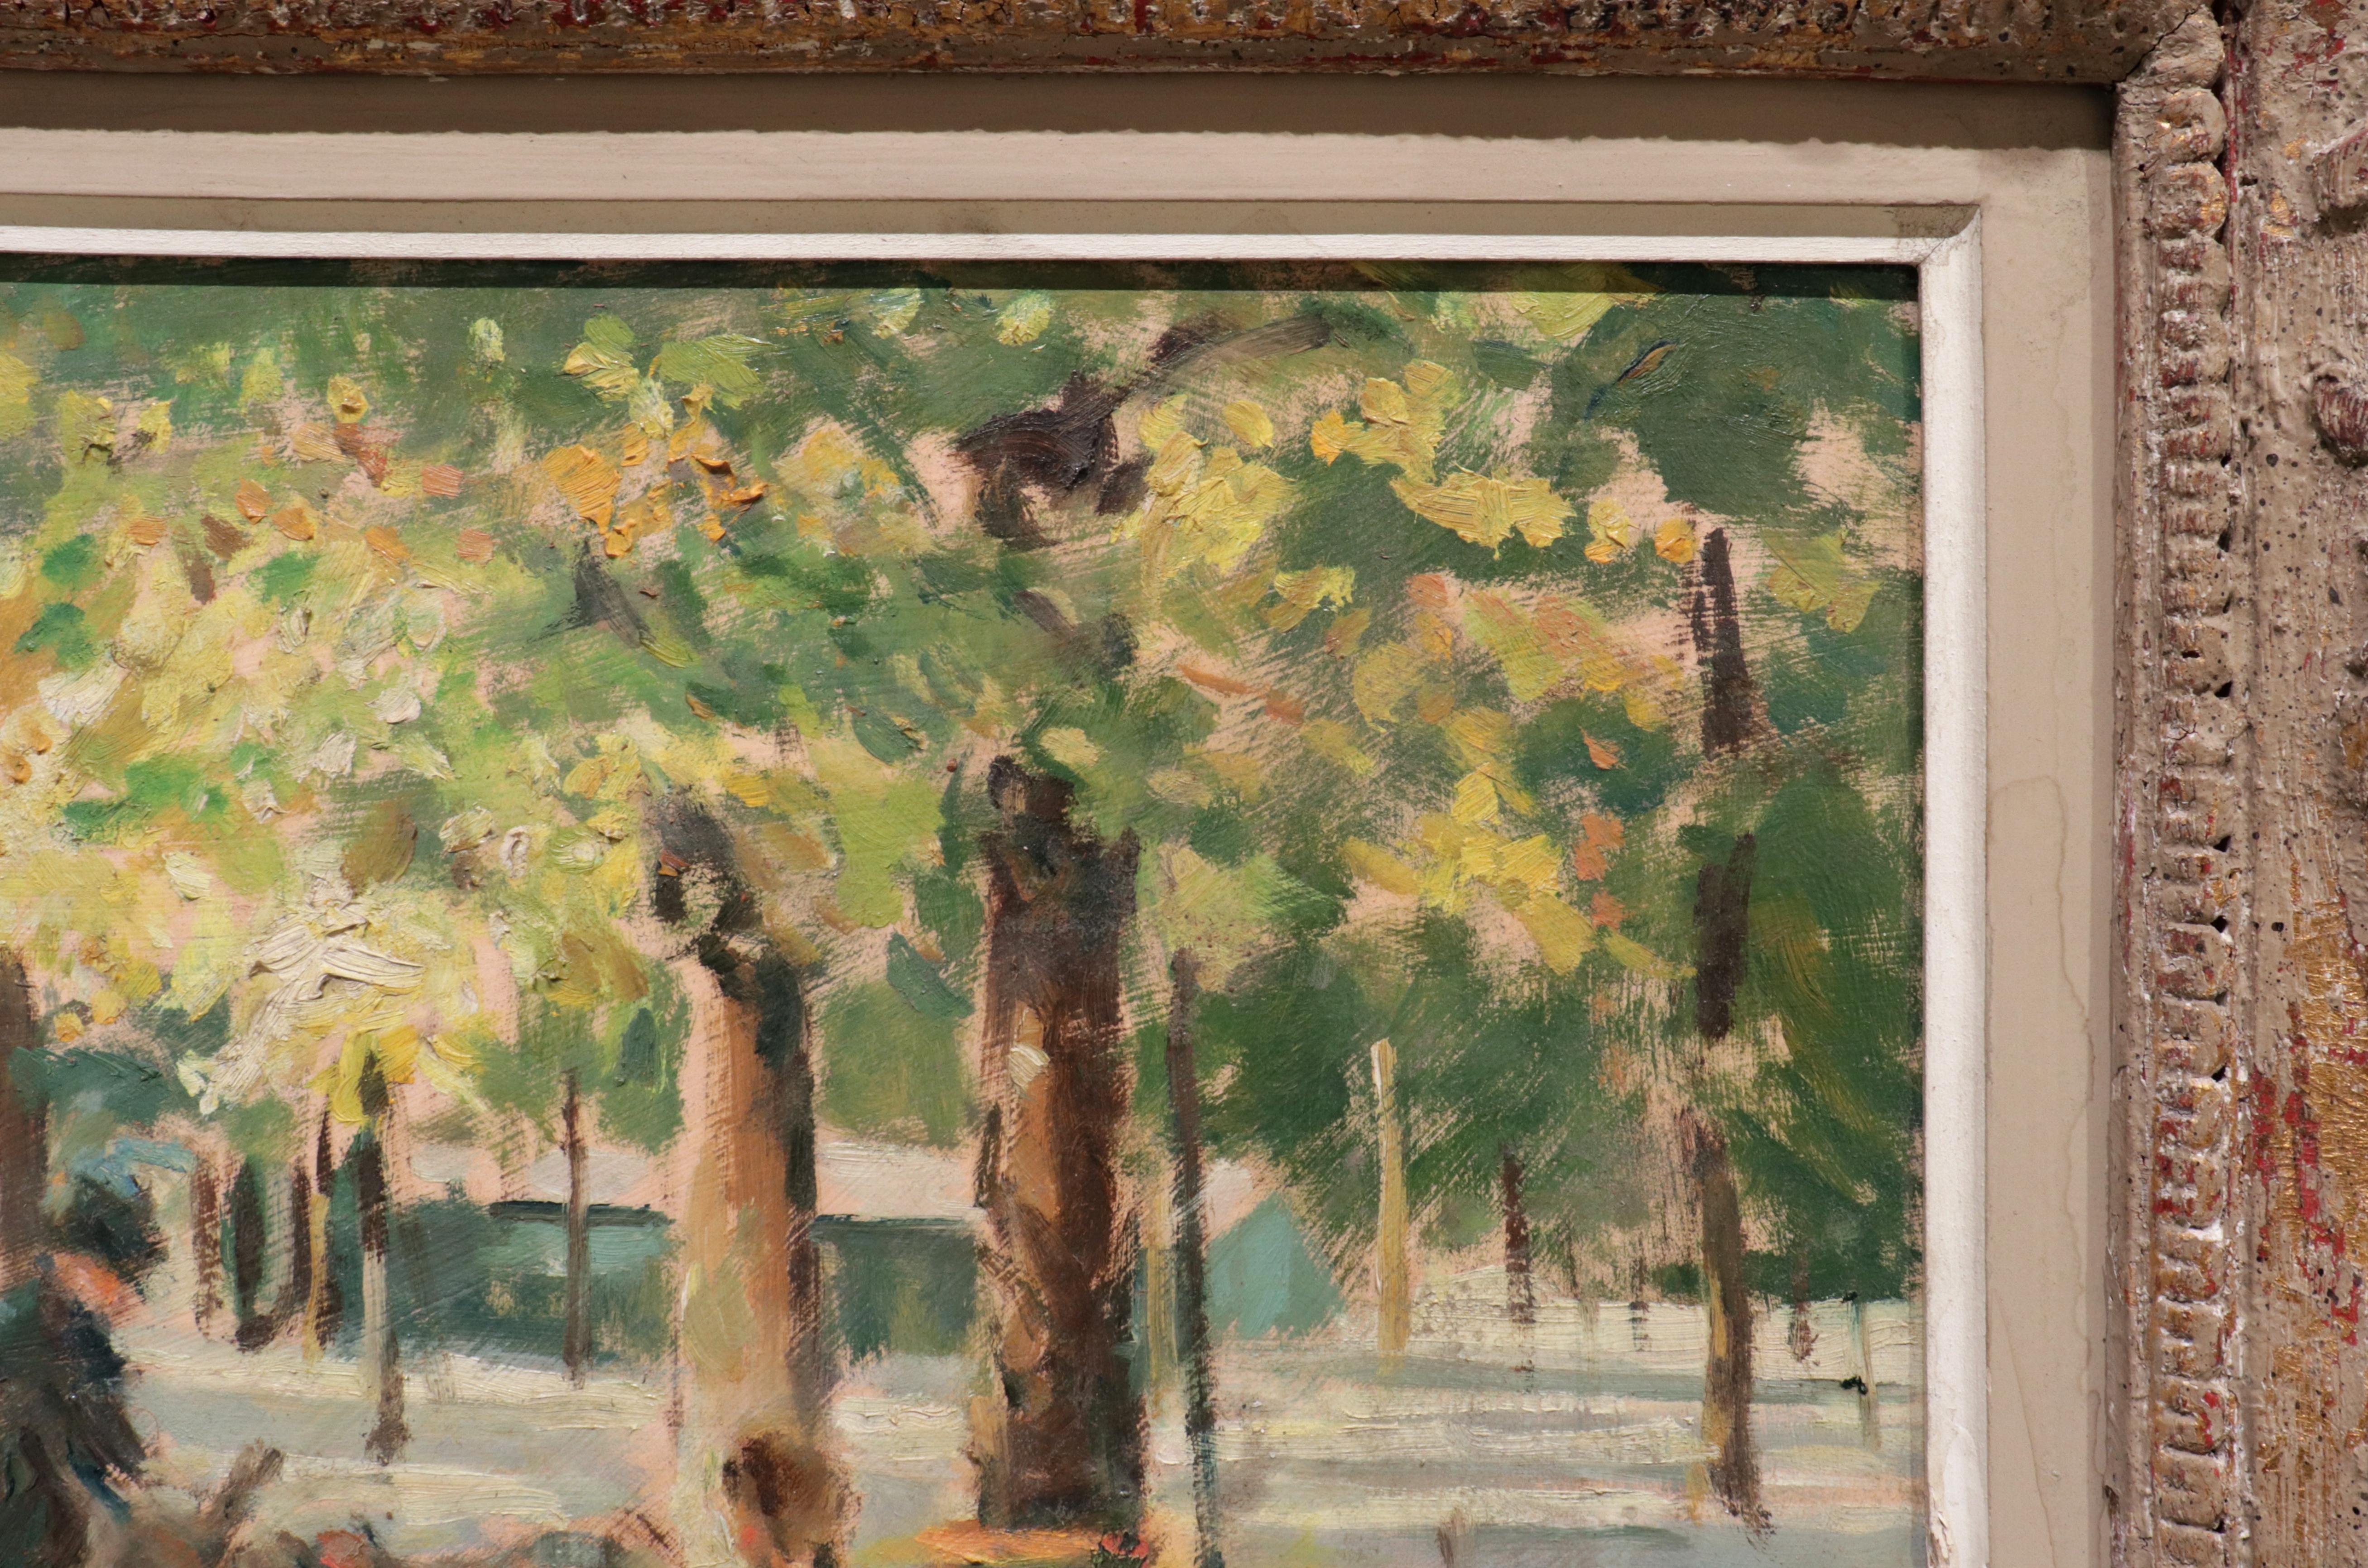 Park Scene by American Impressionist Marie Stobbe in original frame. 
Framed Dimensions: 16.1875 x 19.375 in. (41.1 x 49.2 cm.)

Artist Biography:
Marie B. Stobbe was born in Brooklyn on July 26, 1909.  She was a lifelong resident of Glen Cove, NY. 